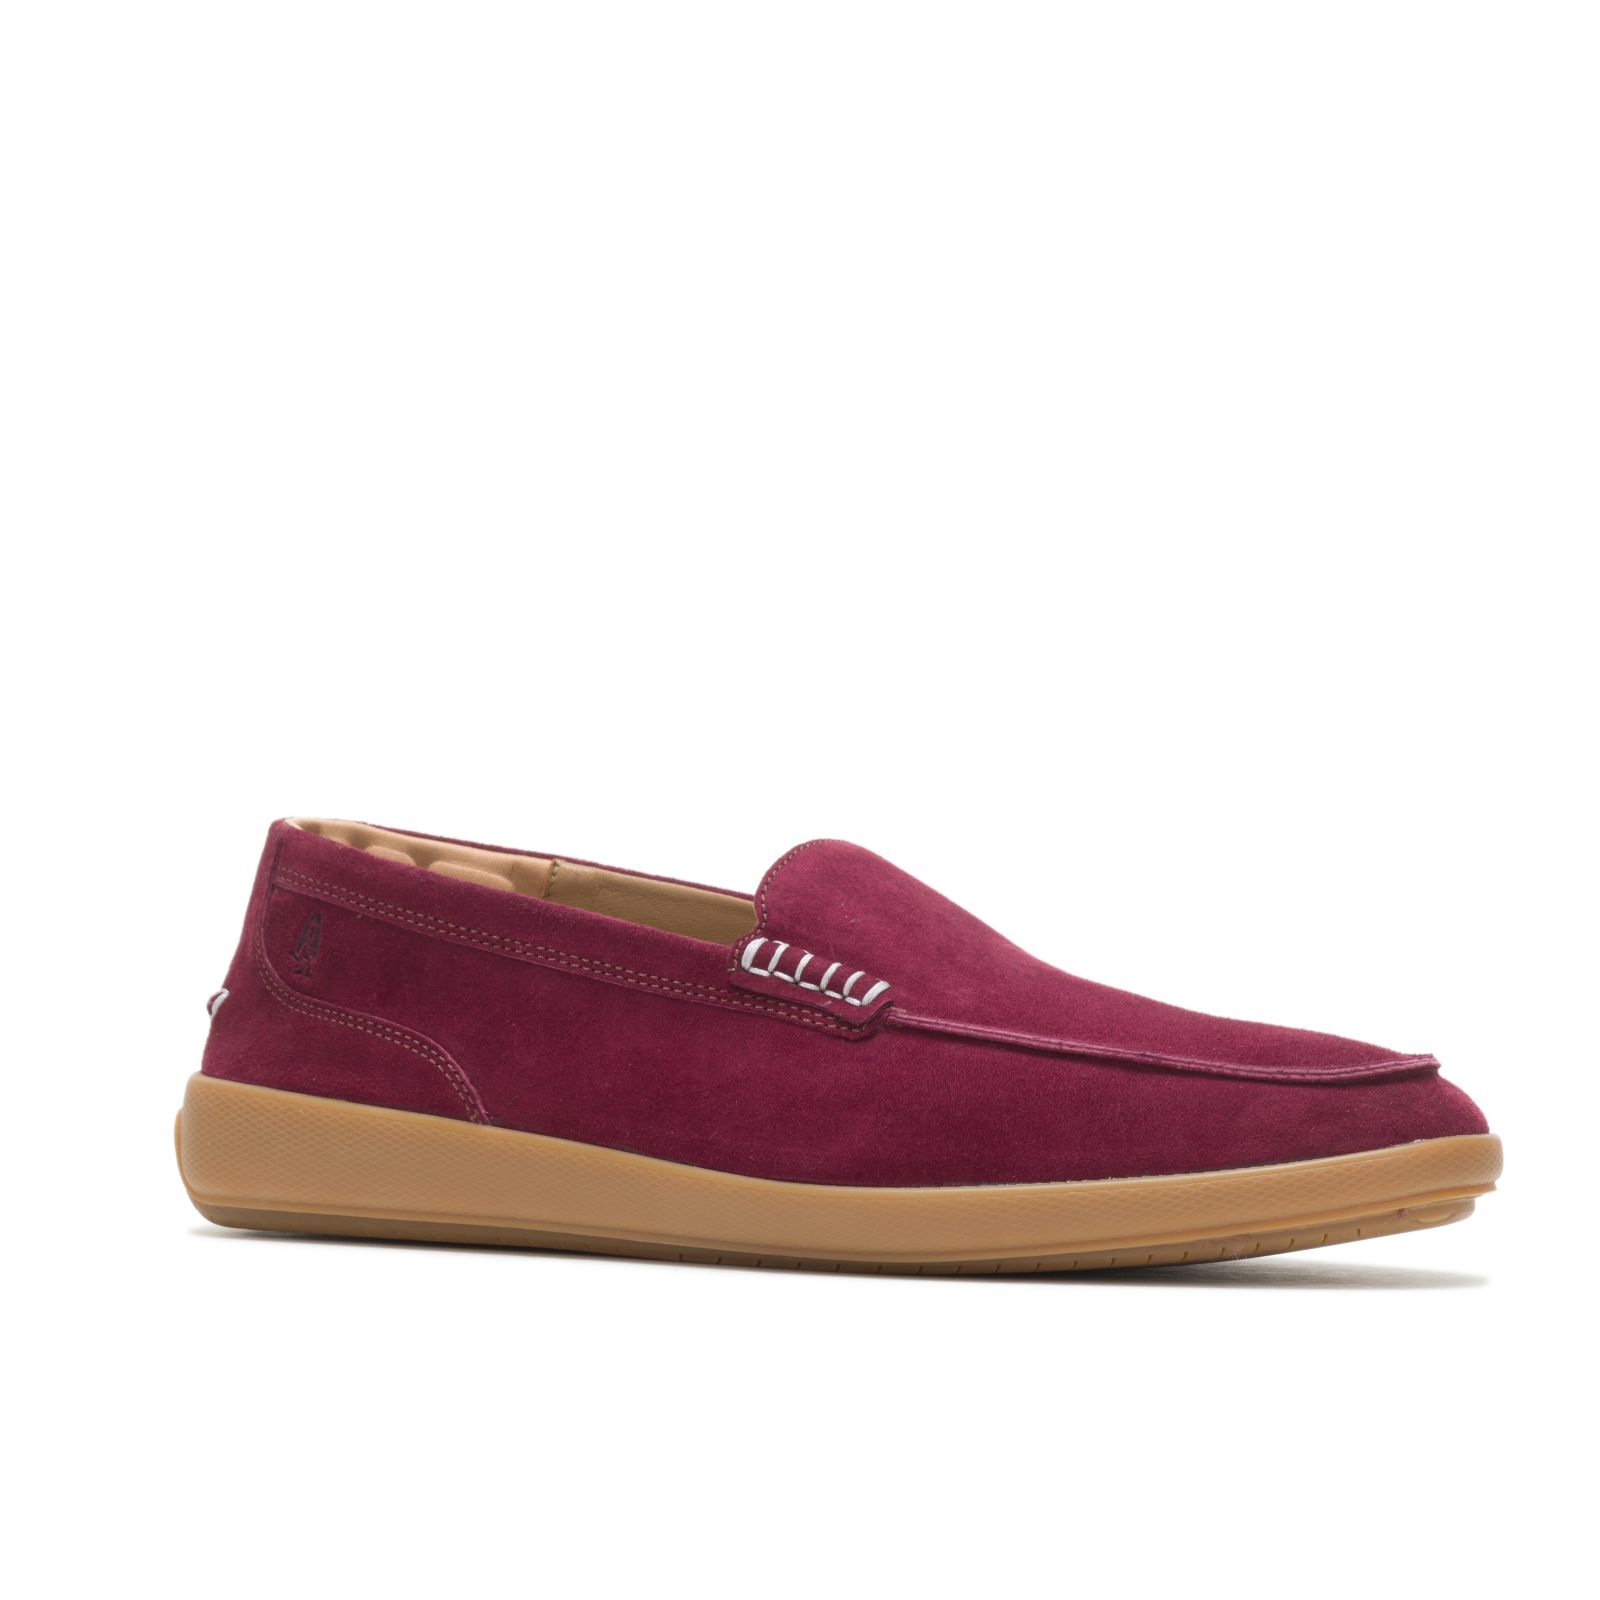 Loafers Hush Puppies Finley Hombre Vino | QBRIAGM-72